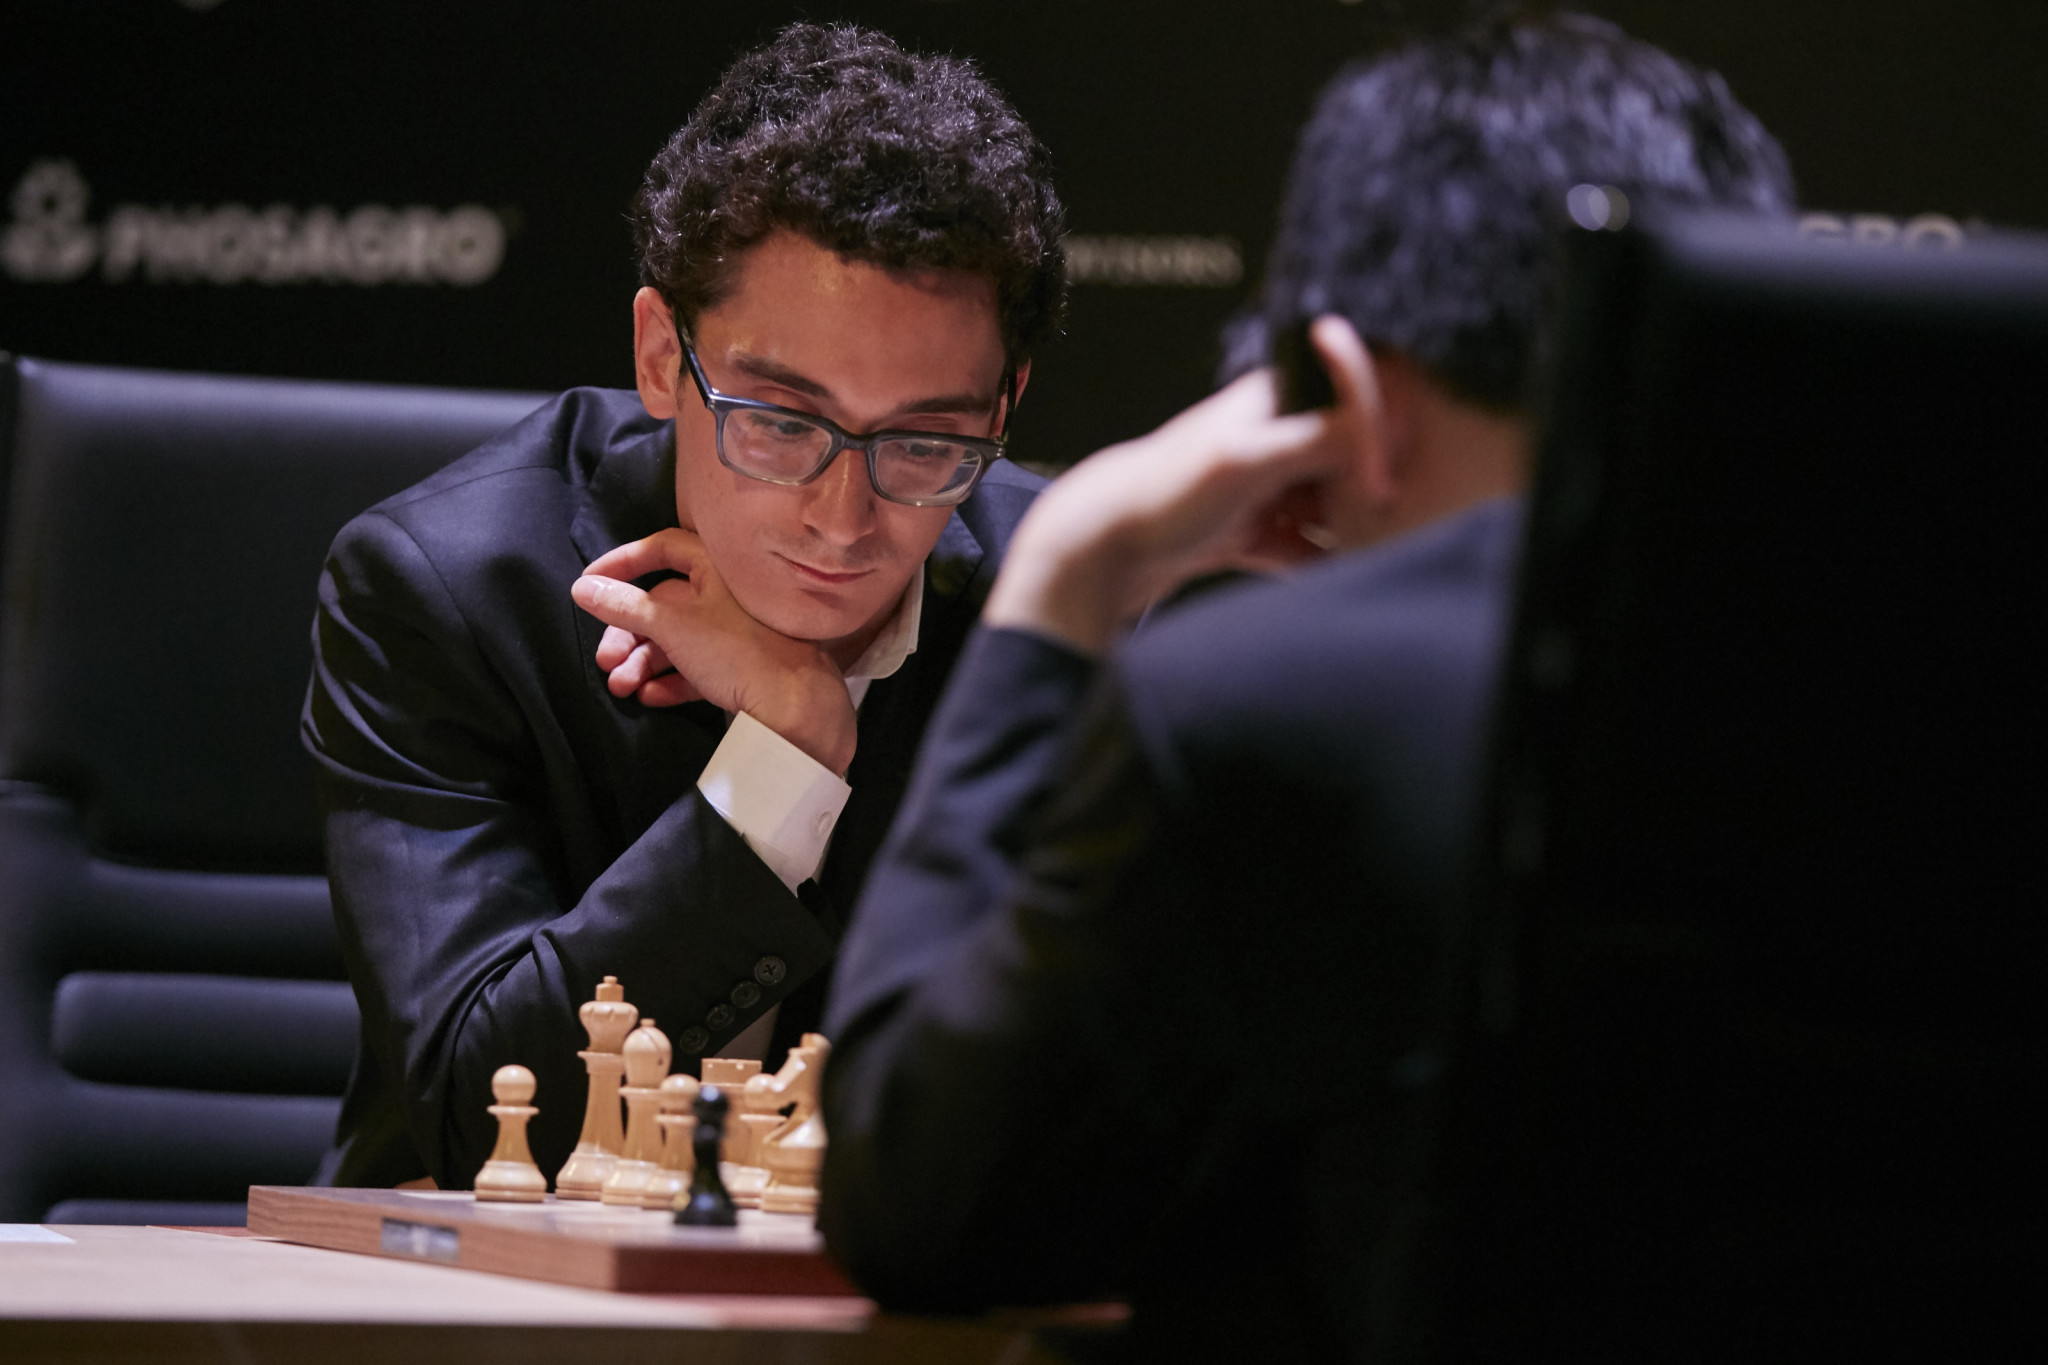 Caruana returns to summit of FIDE Candidates Tournament table going into final round